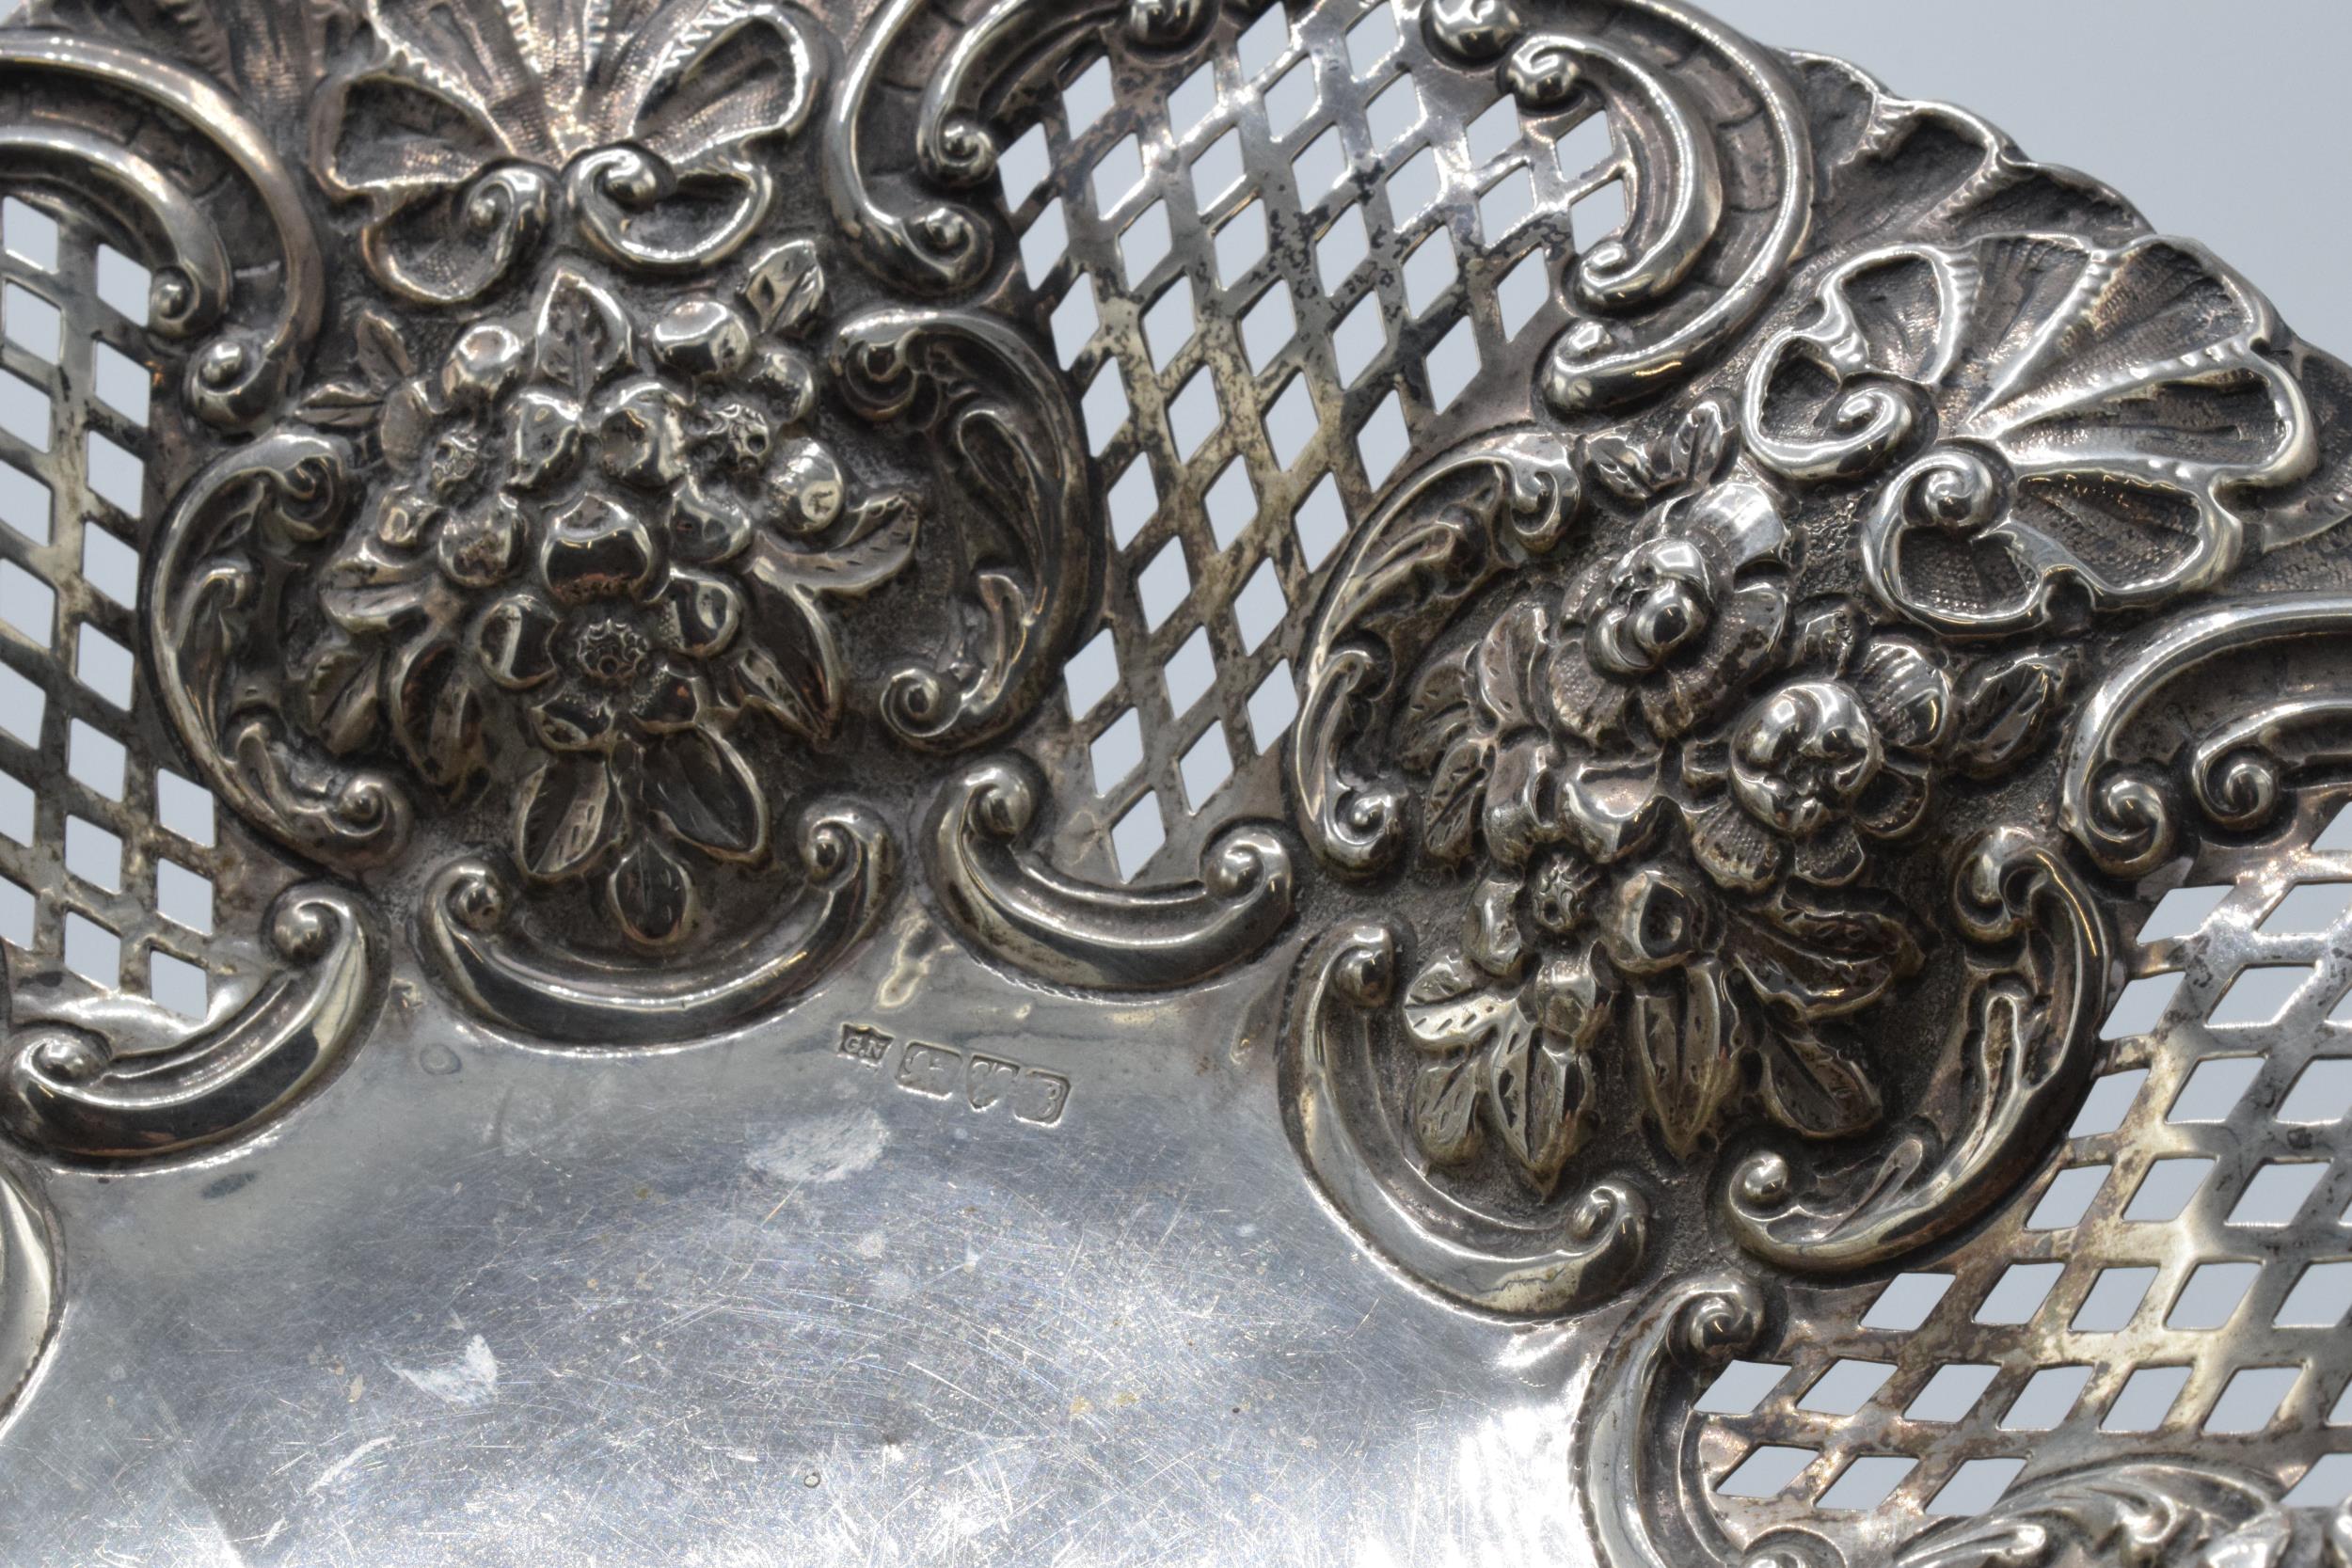 A silver pedestal dish with repousse decoration, Chester 1902, 272.2 grams. 23cm wide. - Image 3 of 4